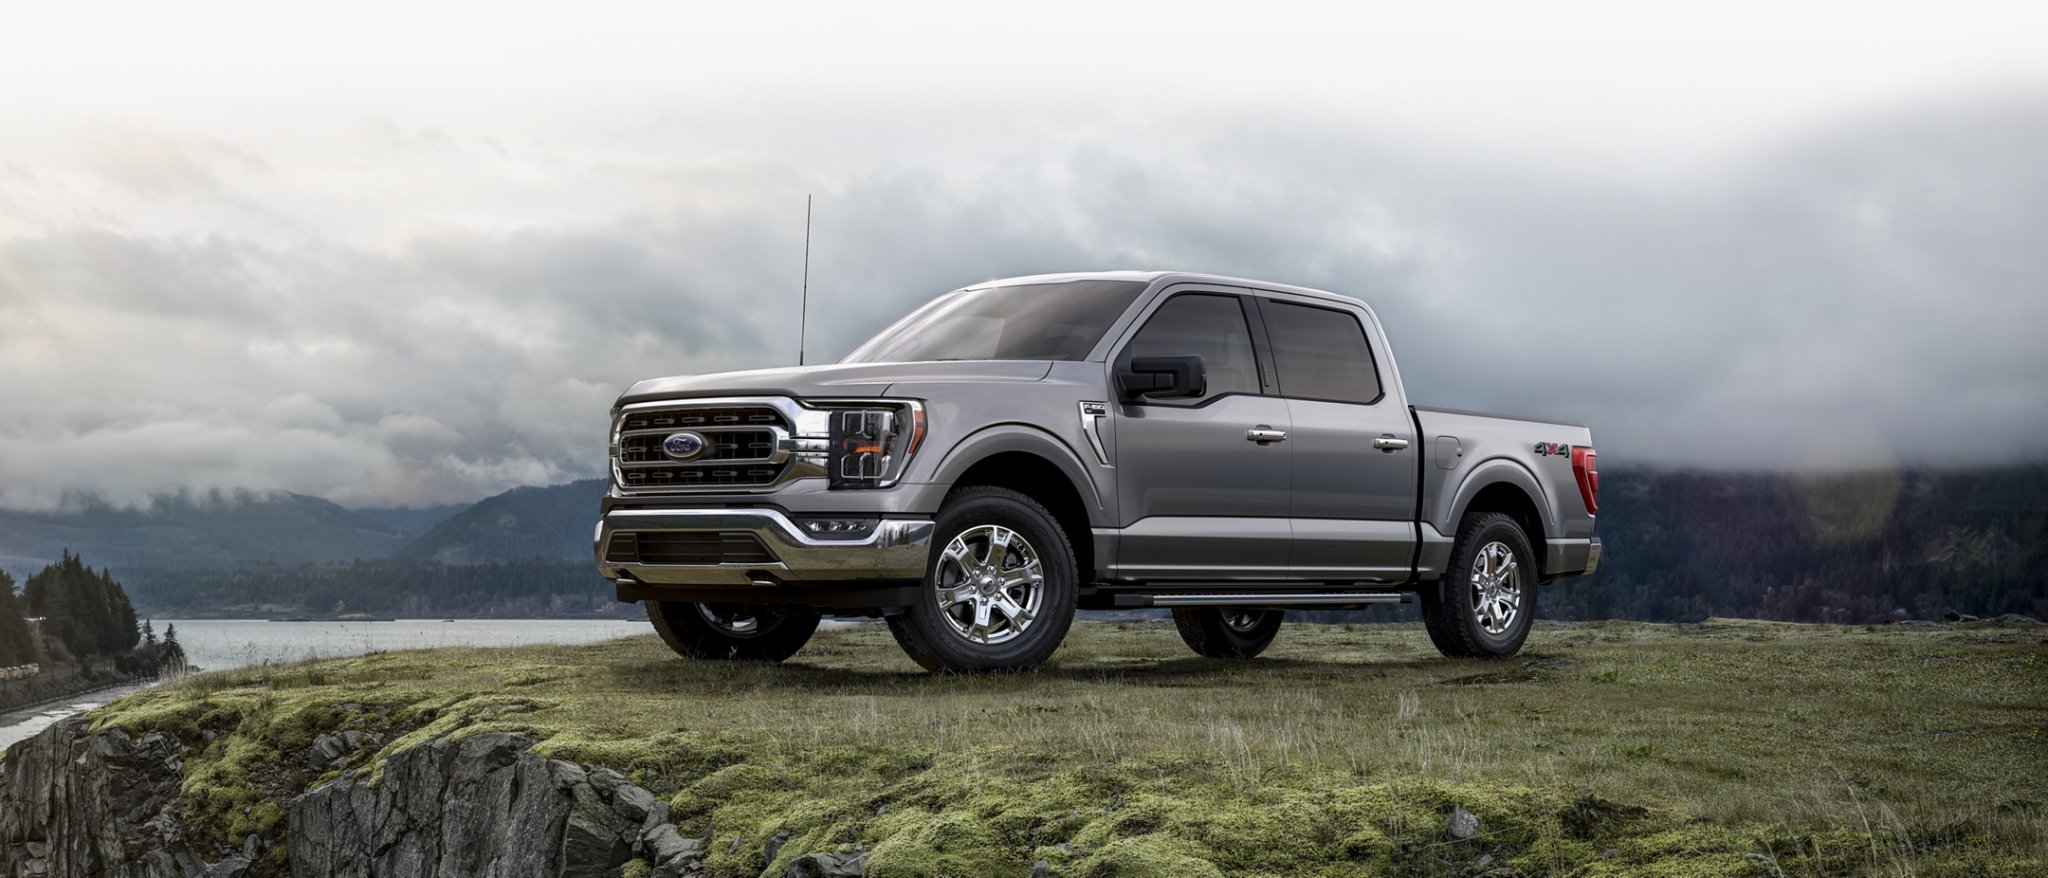 The Redesigned 2021 F-150 Pickup: A First Look - Autoversed